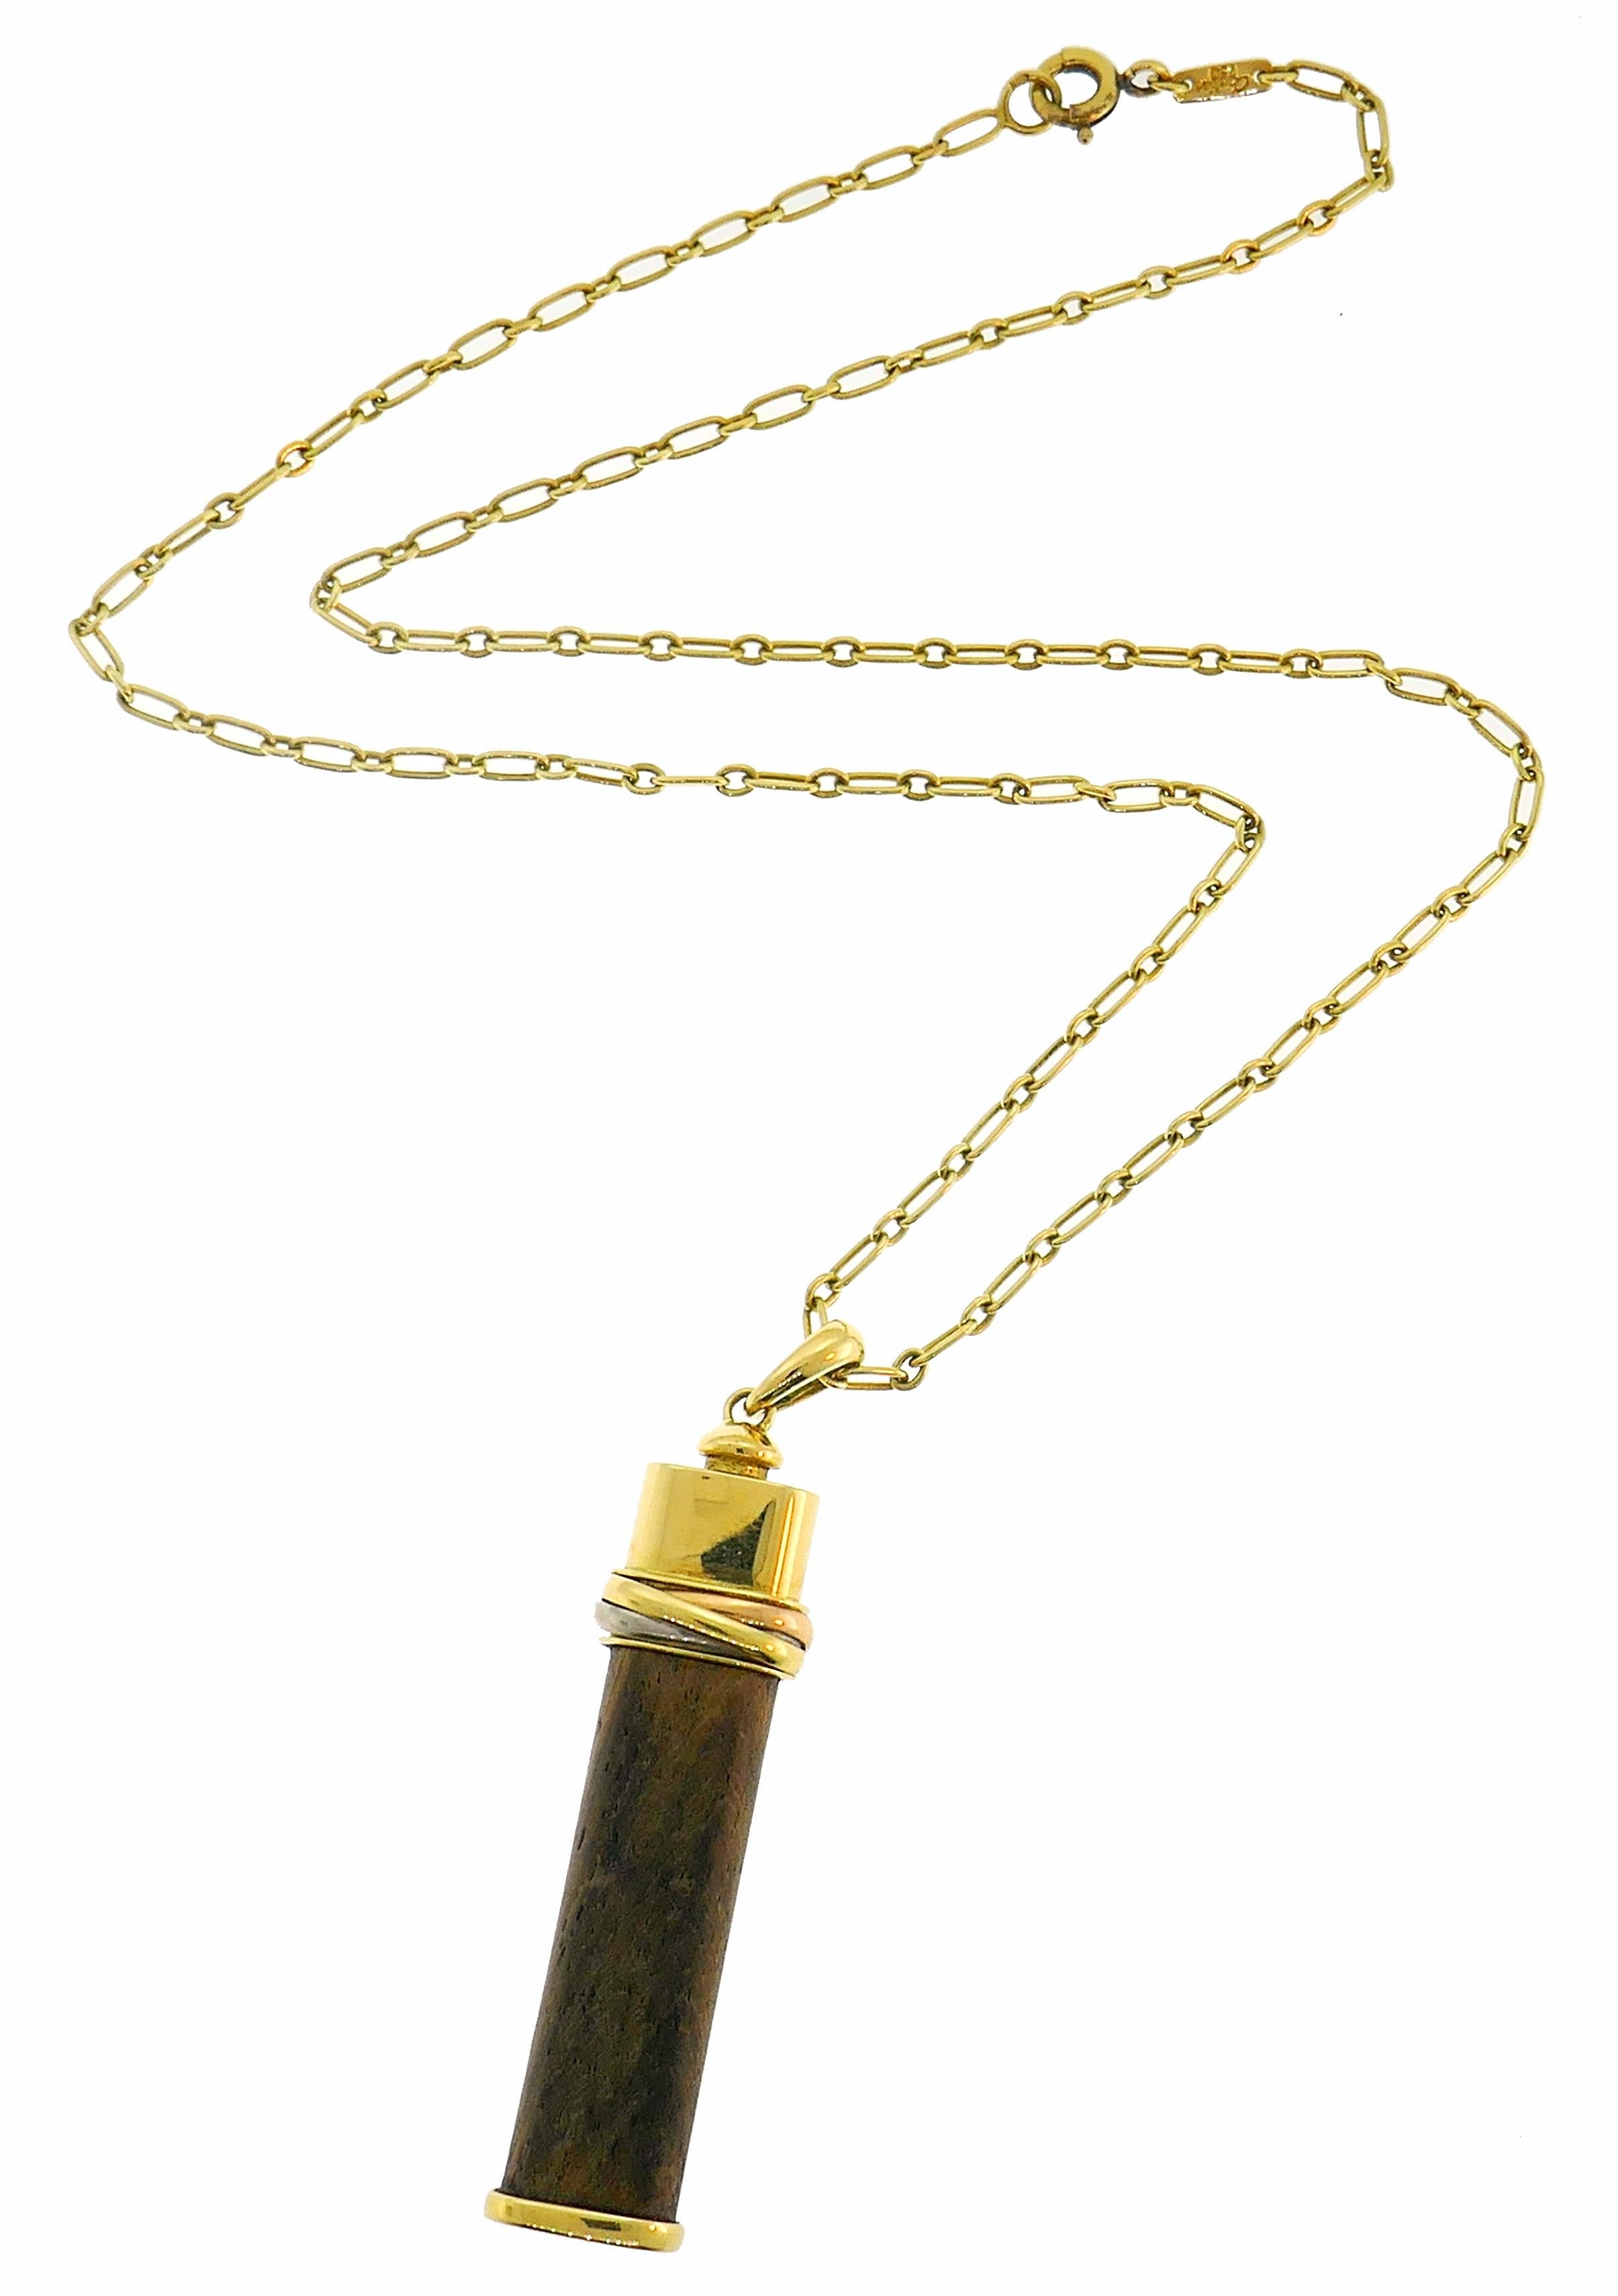 Signature Touch Wood pendant created by Cartier. Recognizable, It is made of 18 karat yellow, white and rose gold and wood. 
The pendant measures 1-3/4 x 3/8 x 1/4 inches (4.5 x 1.0 x 0.8 centimeters), the chain measures 18 x 1/16 inches (45 x 0.2